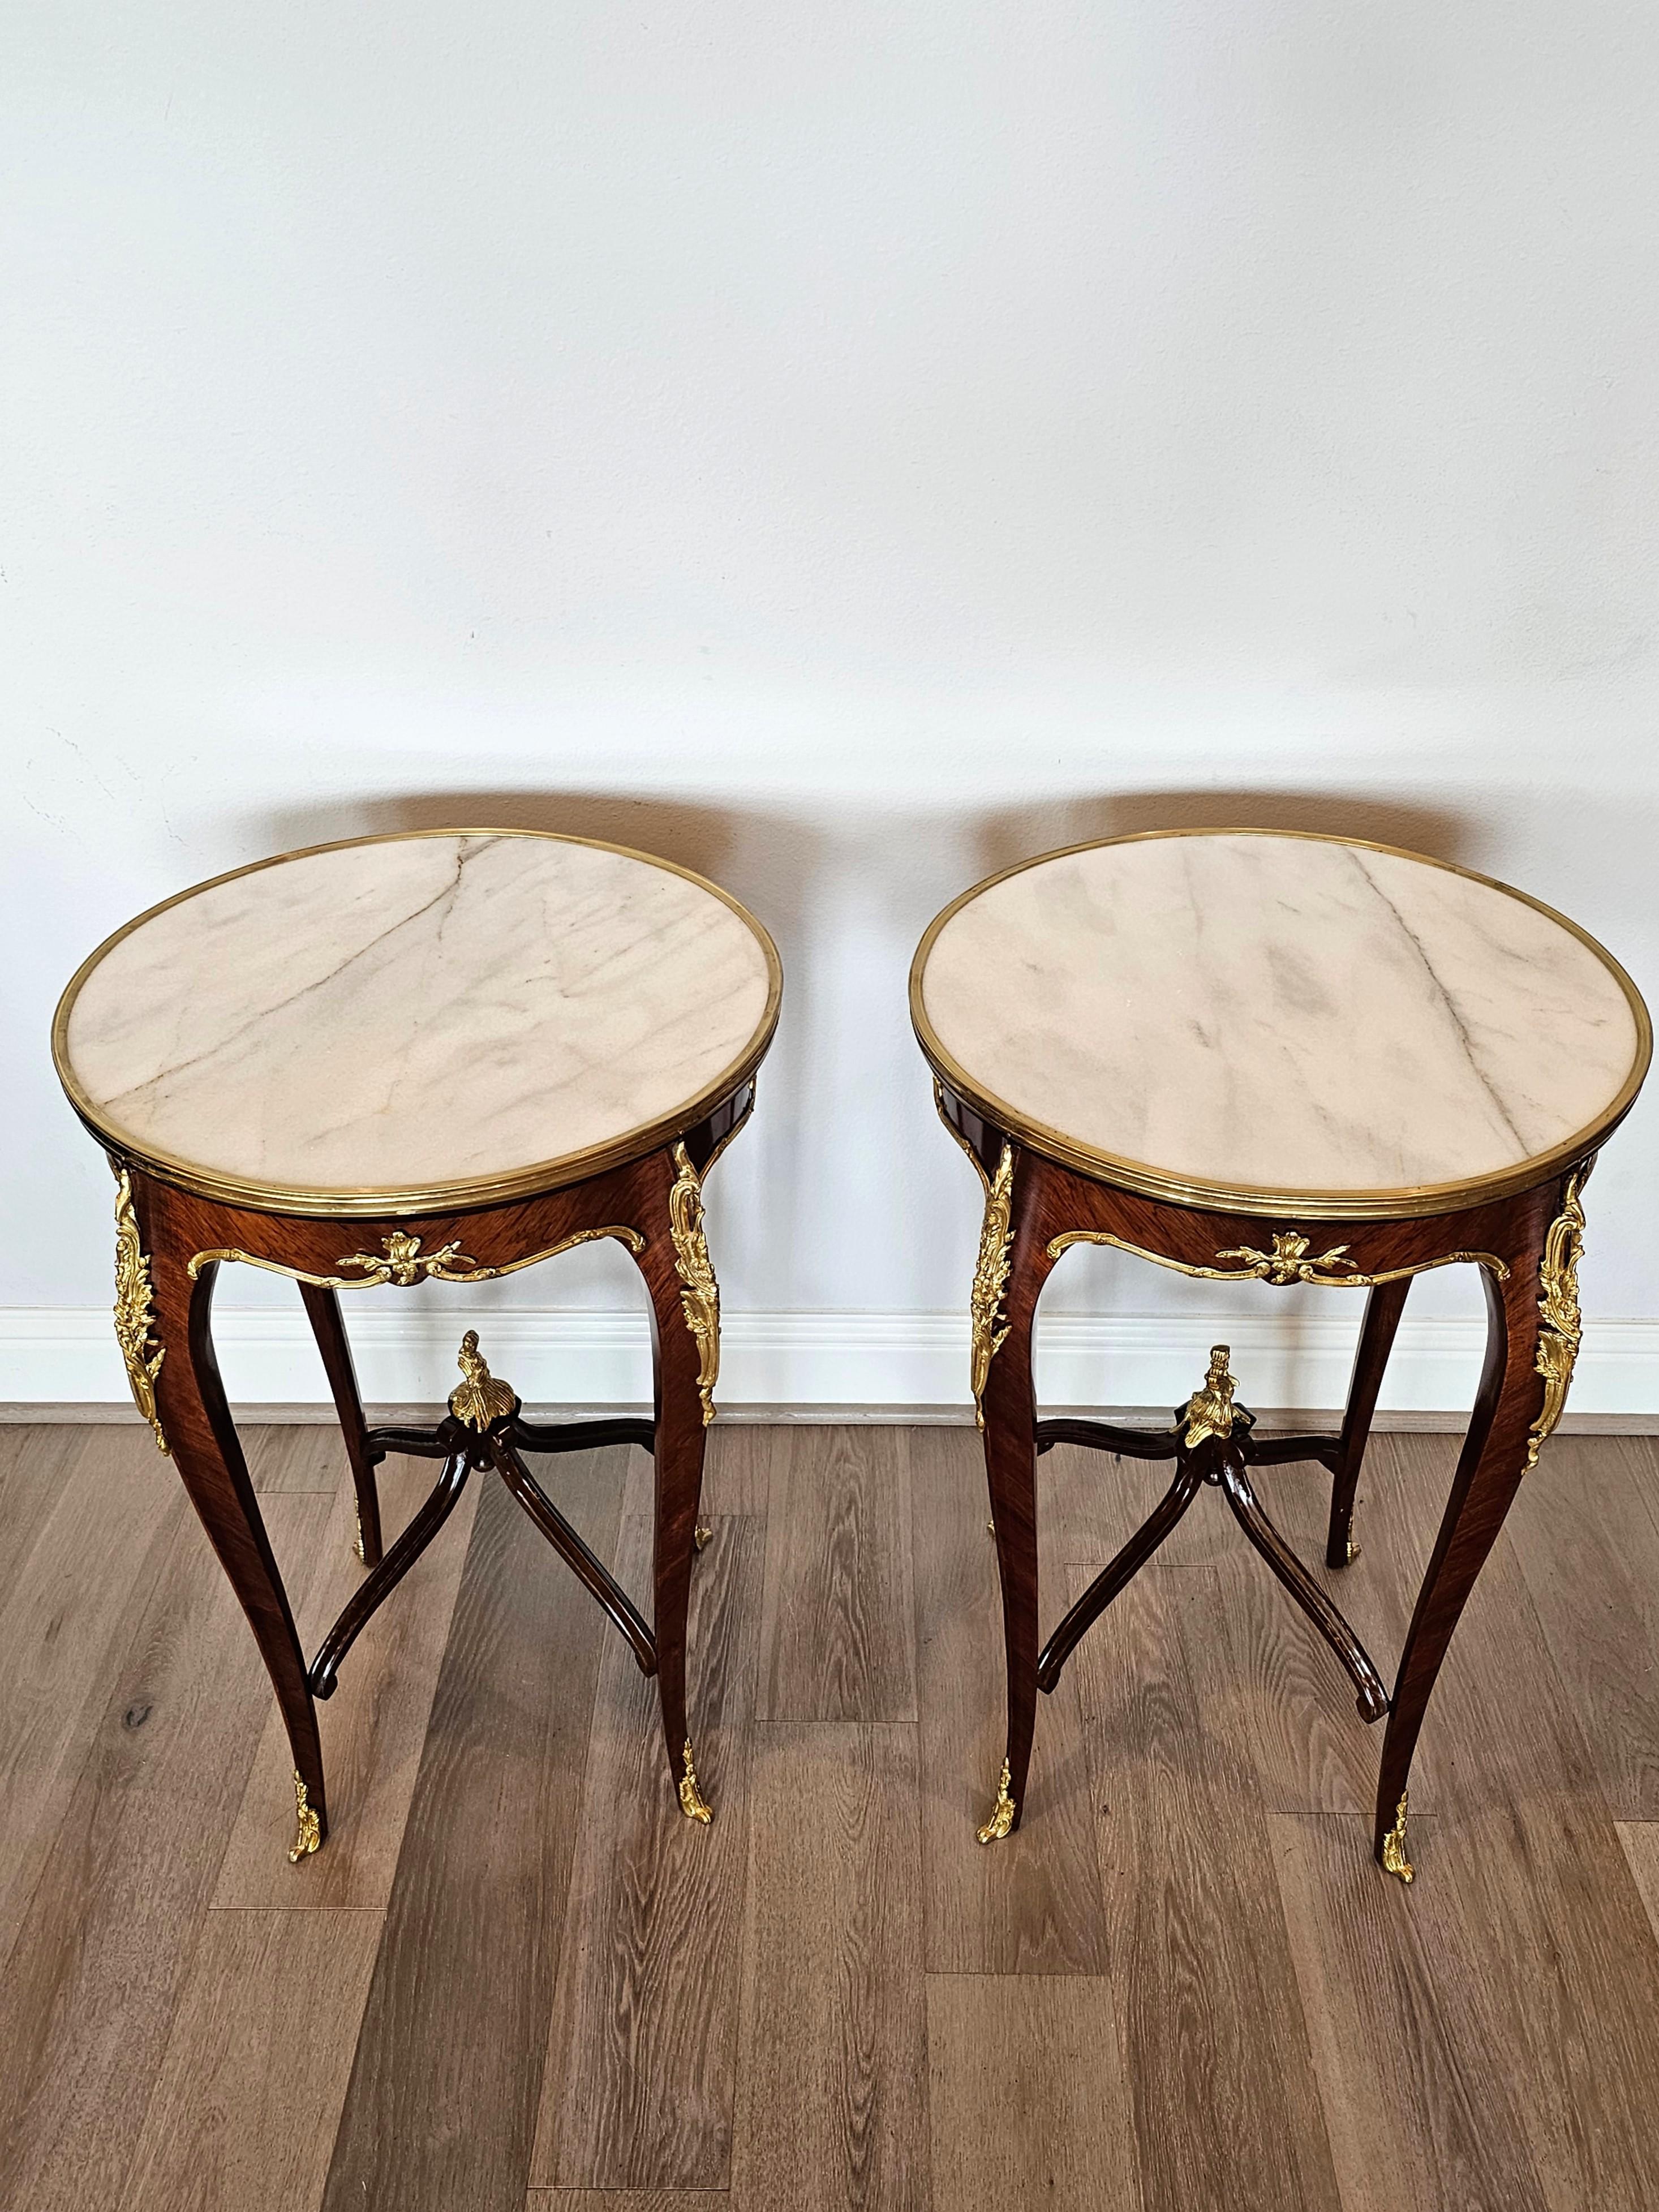 Pair of French Louis XV Style Gilt Bronze Mounted Kingwood Side Tables For Sale 3